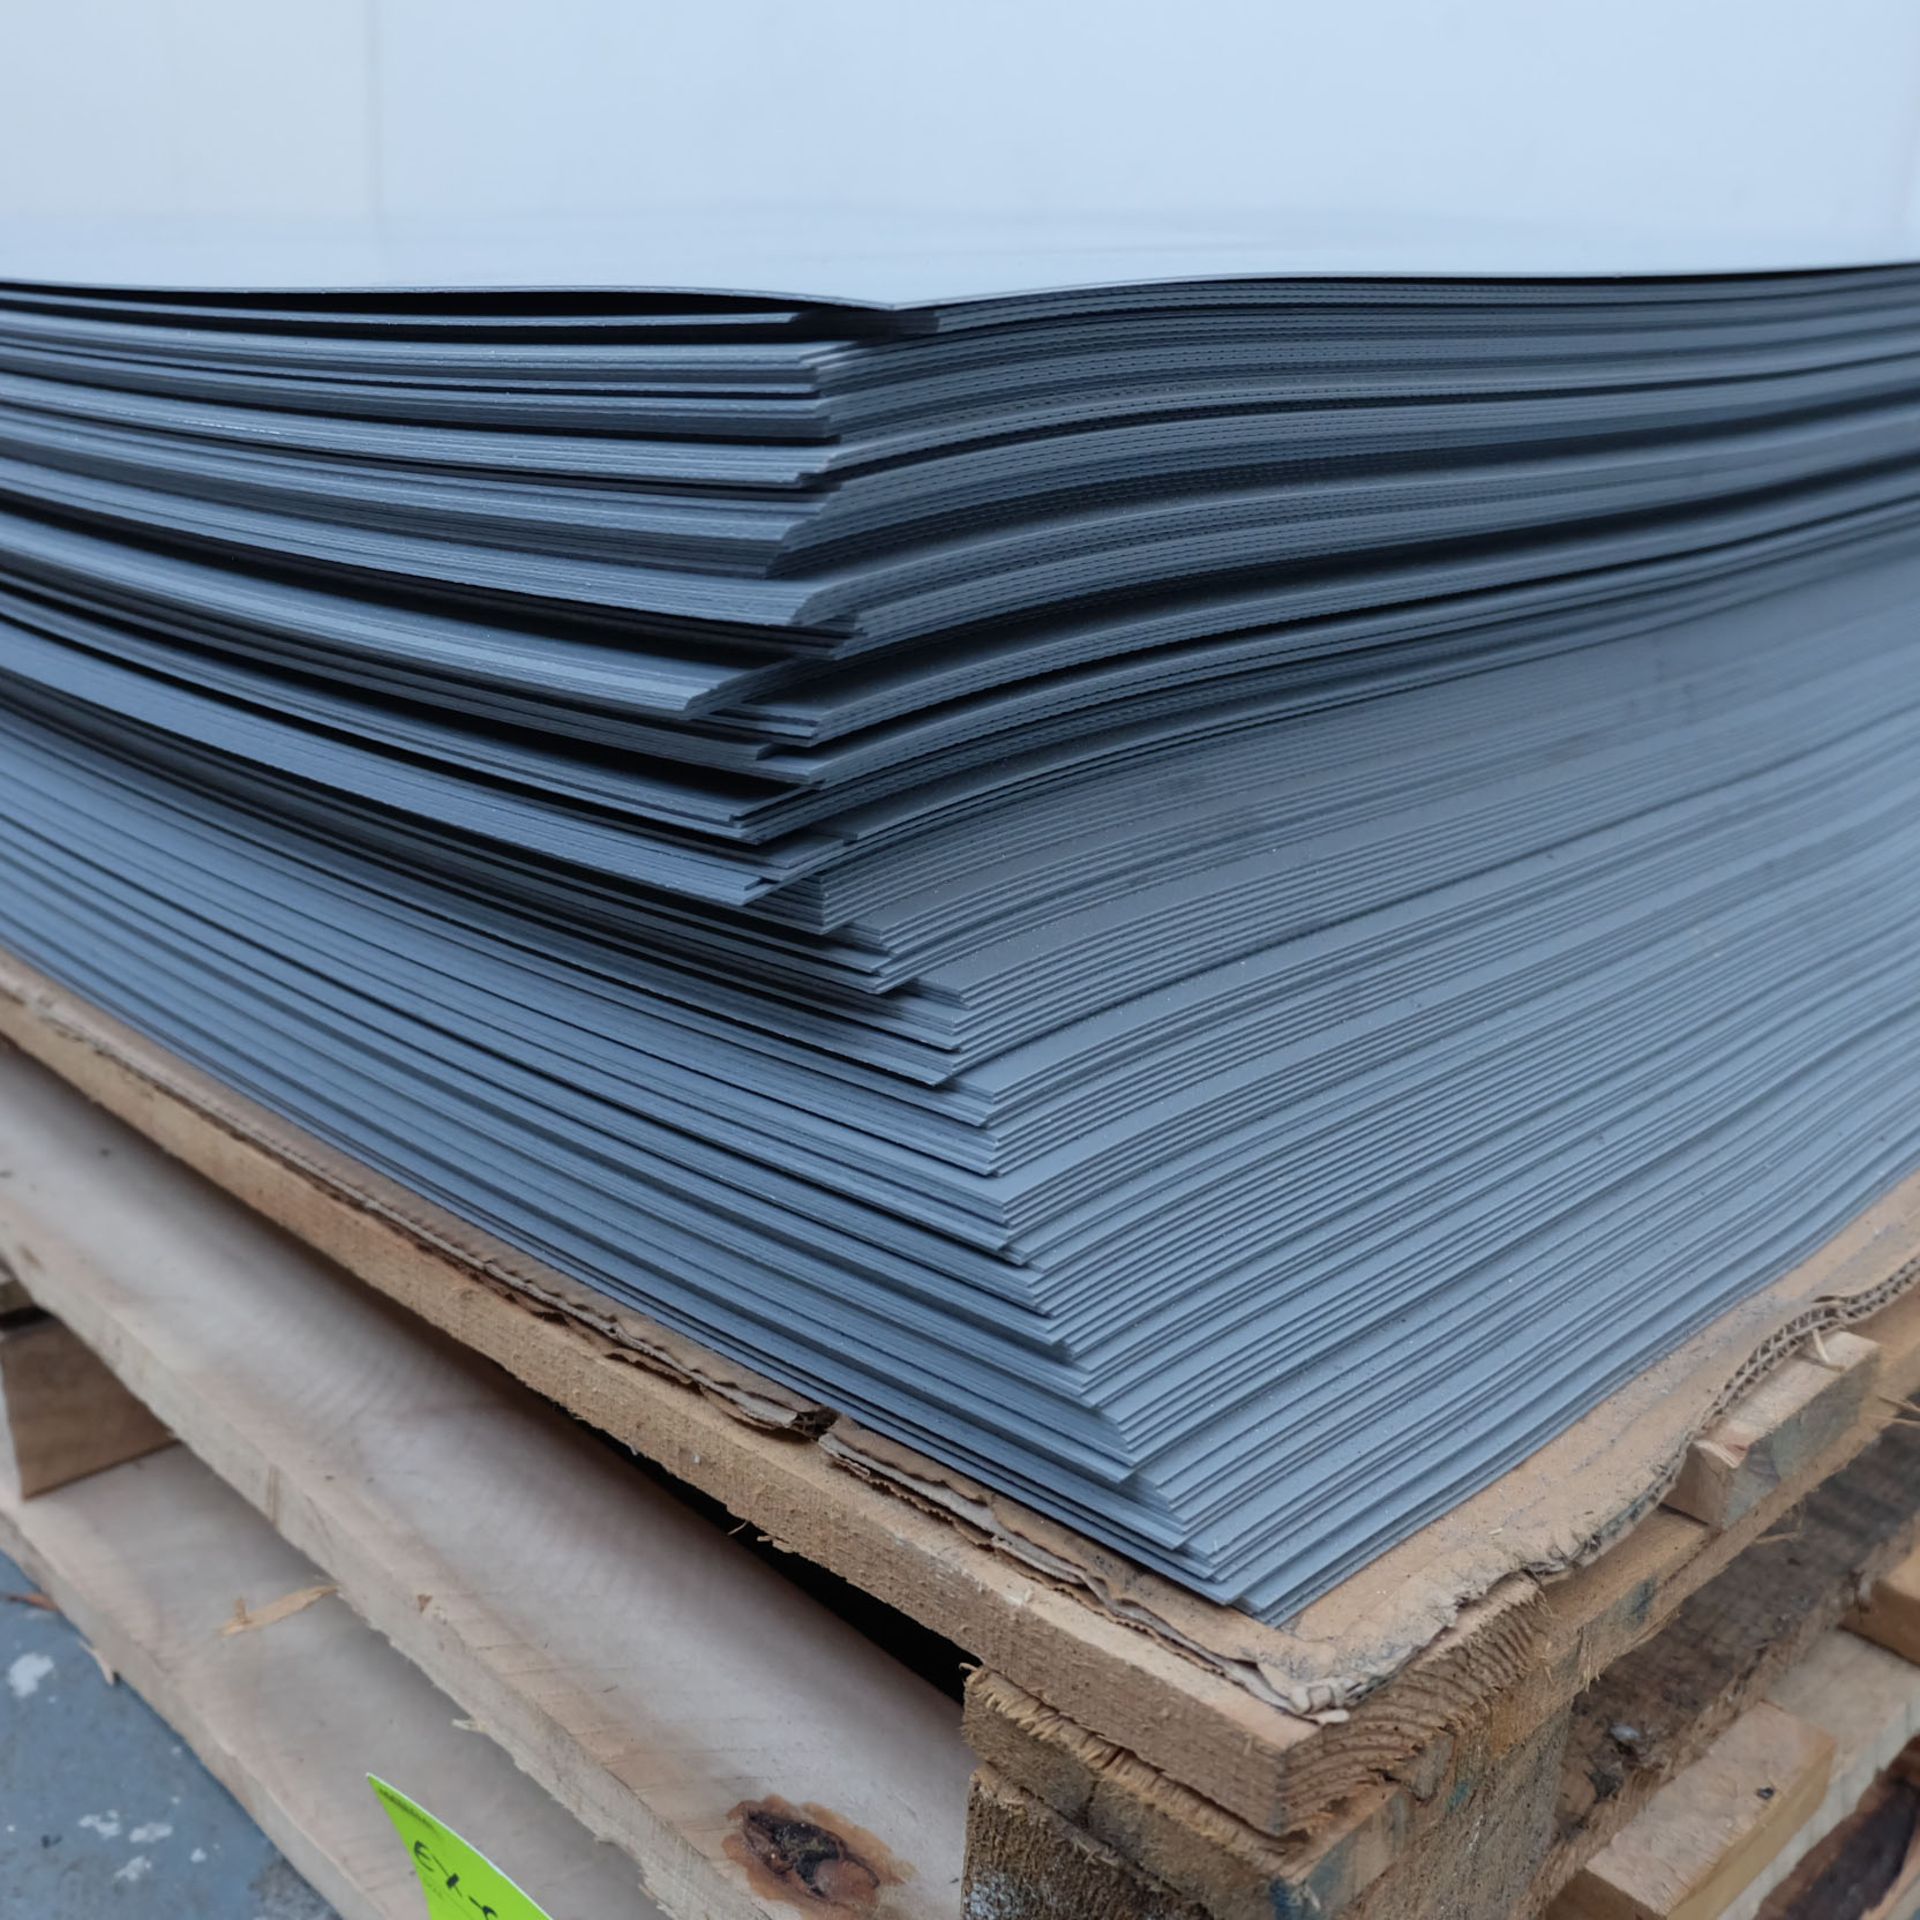 19 1/2 Sheets of Galvanised Steel. Size: 2500mm x 1250mm. - Image 3 of 4